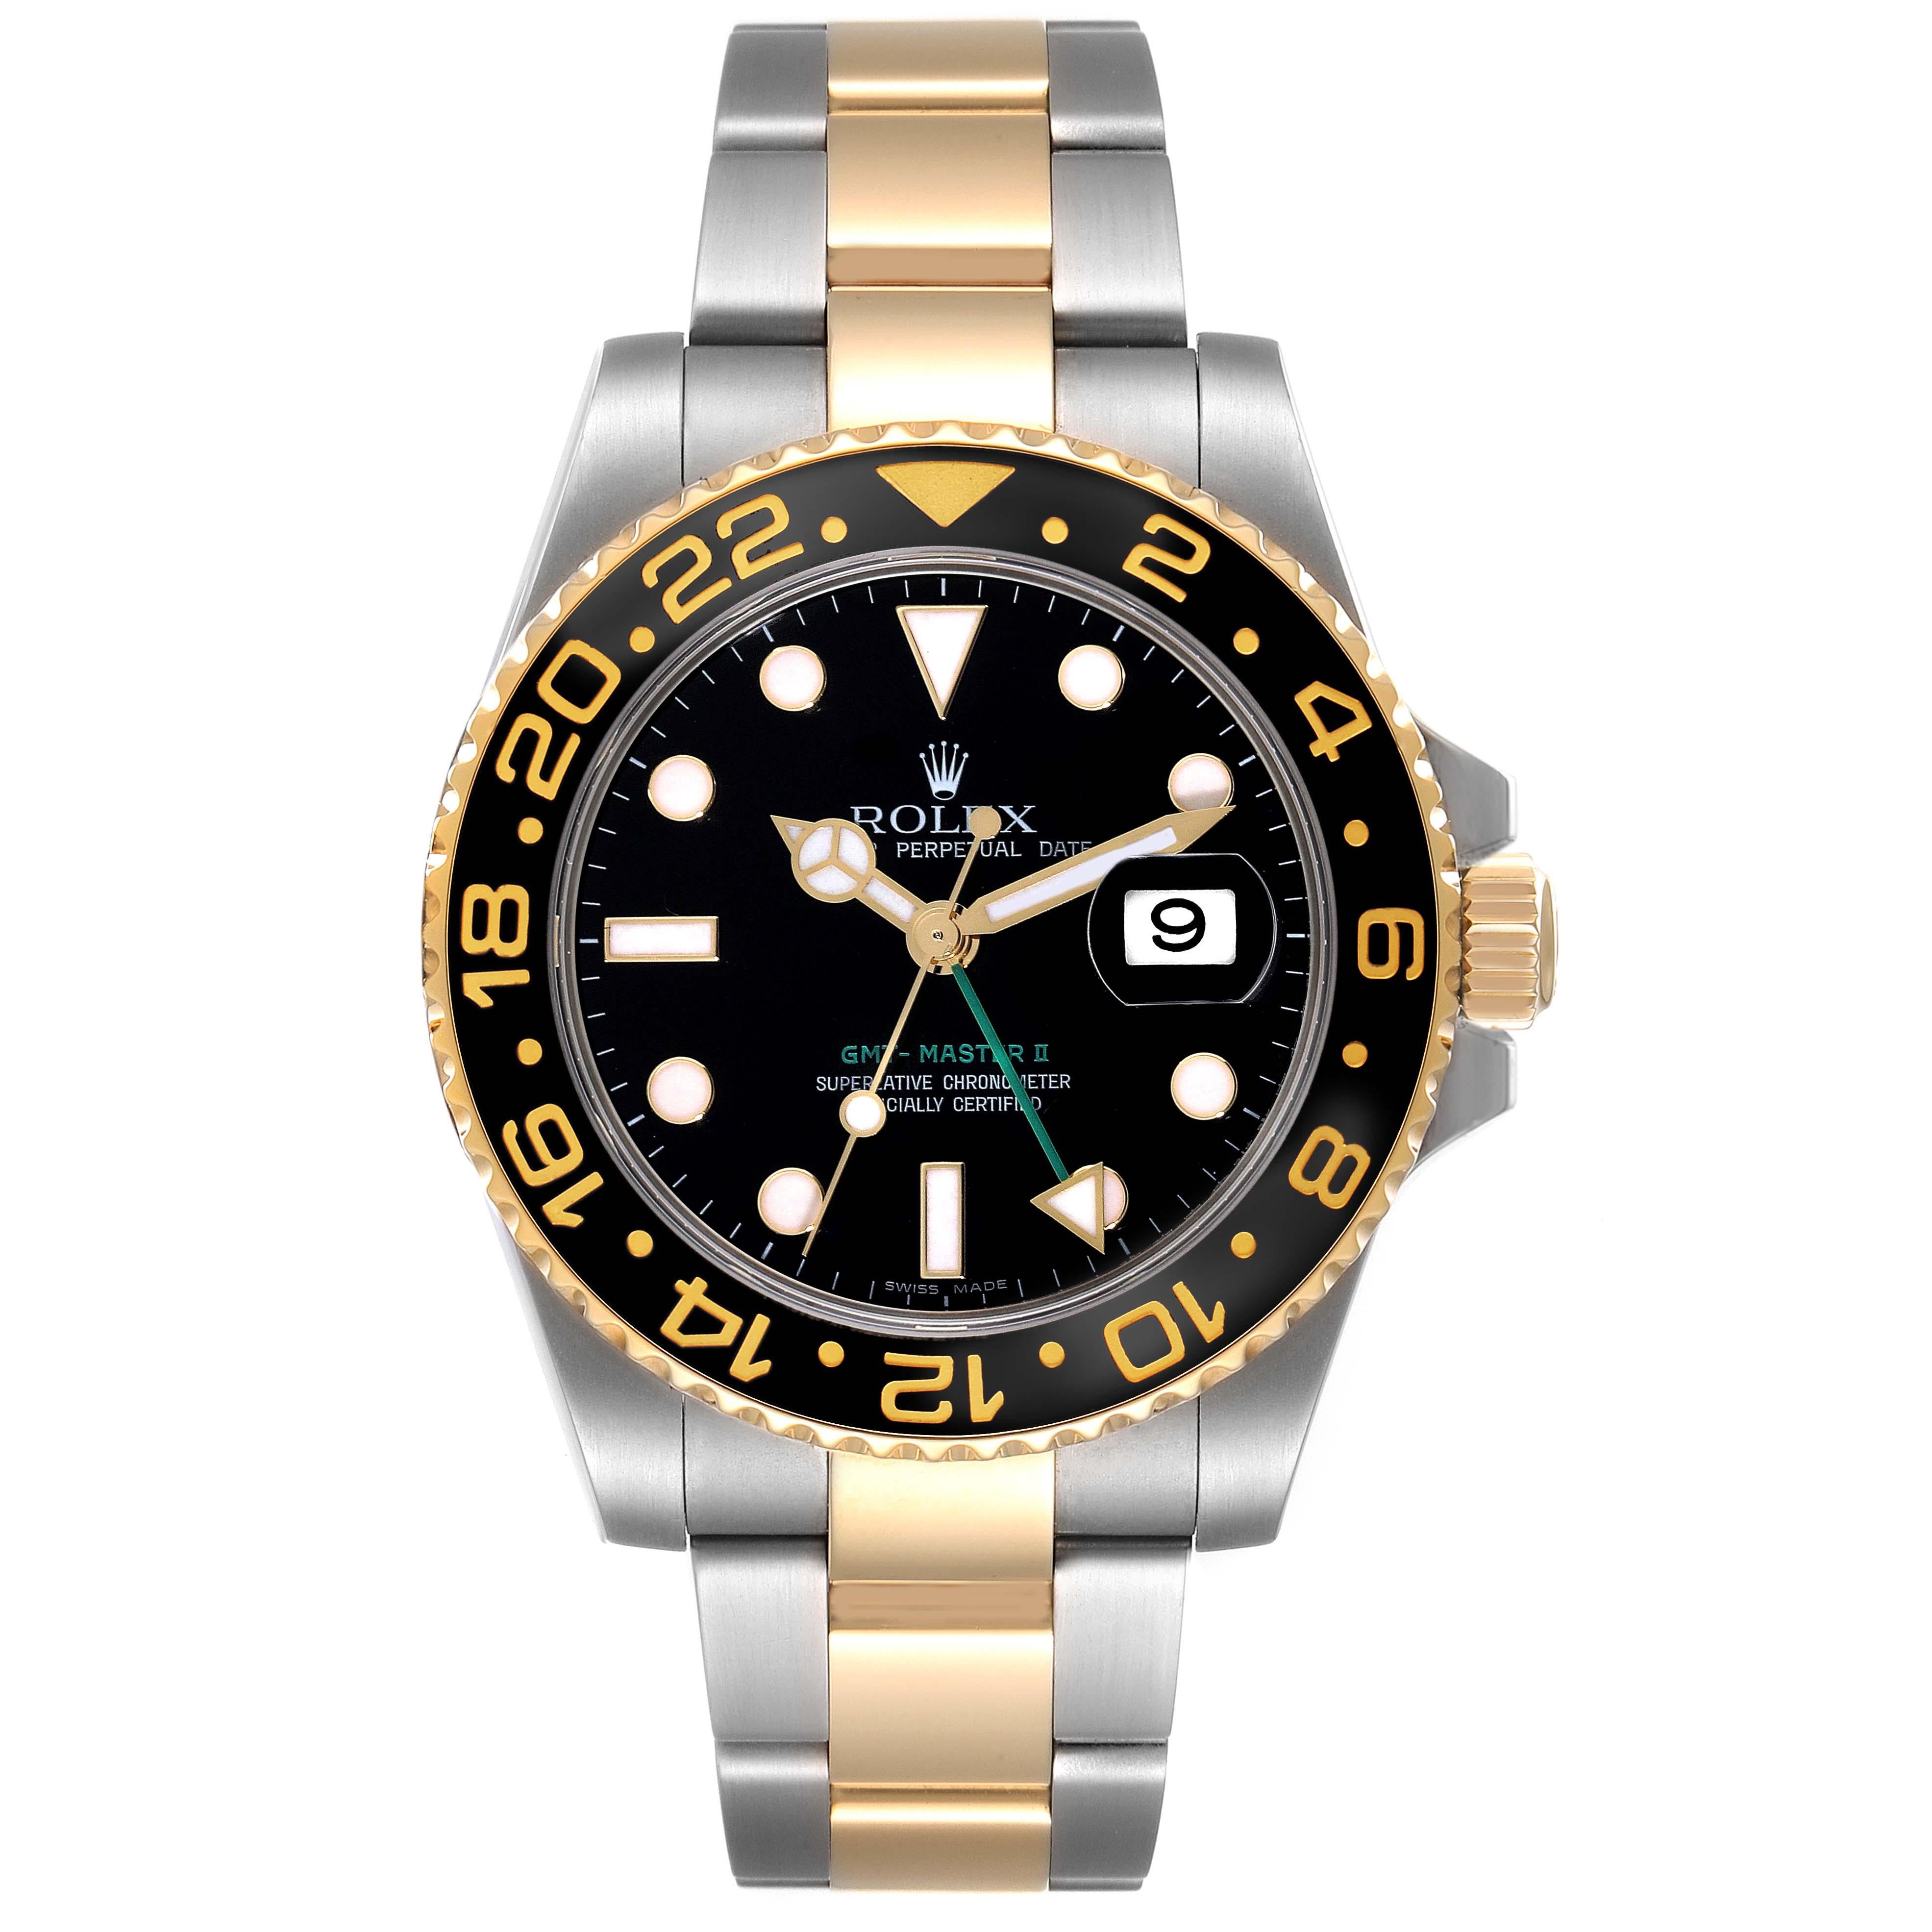 Rolex GMT Master II Steel Yellow Gold Black Dial Mens Watch 116713 Box Card. Officially certified chronometer automatic self-winding movement. Stainless steel case 40 mm in diameter. Rolex logo on the crown. 18k yellow gold bidirectional rotating